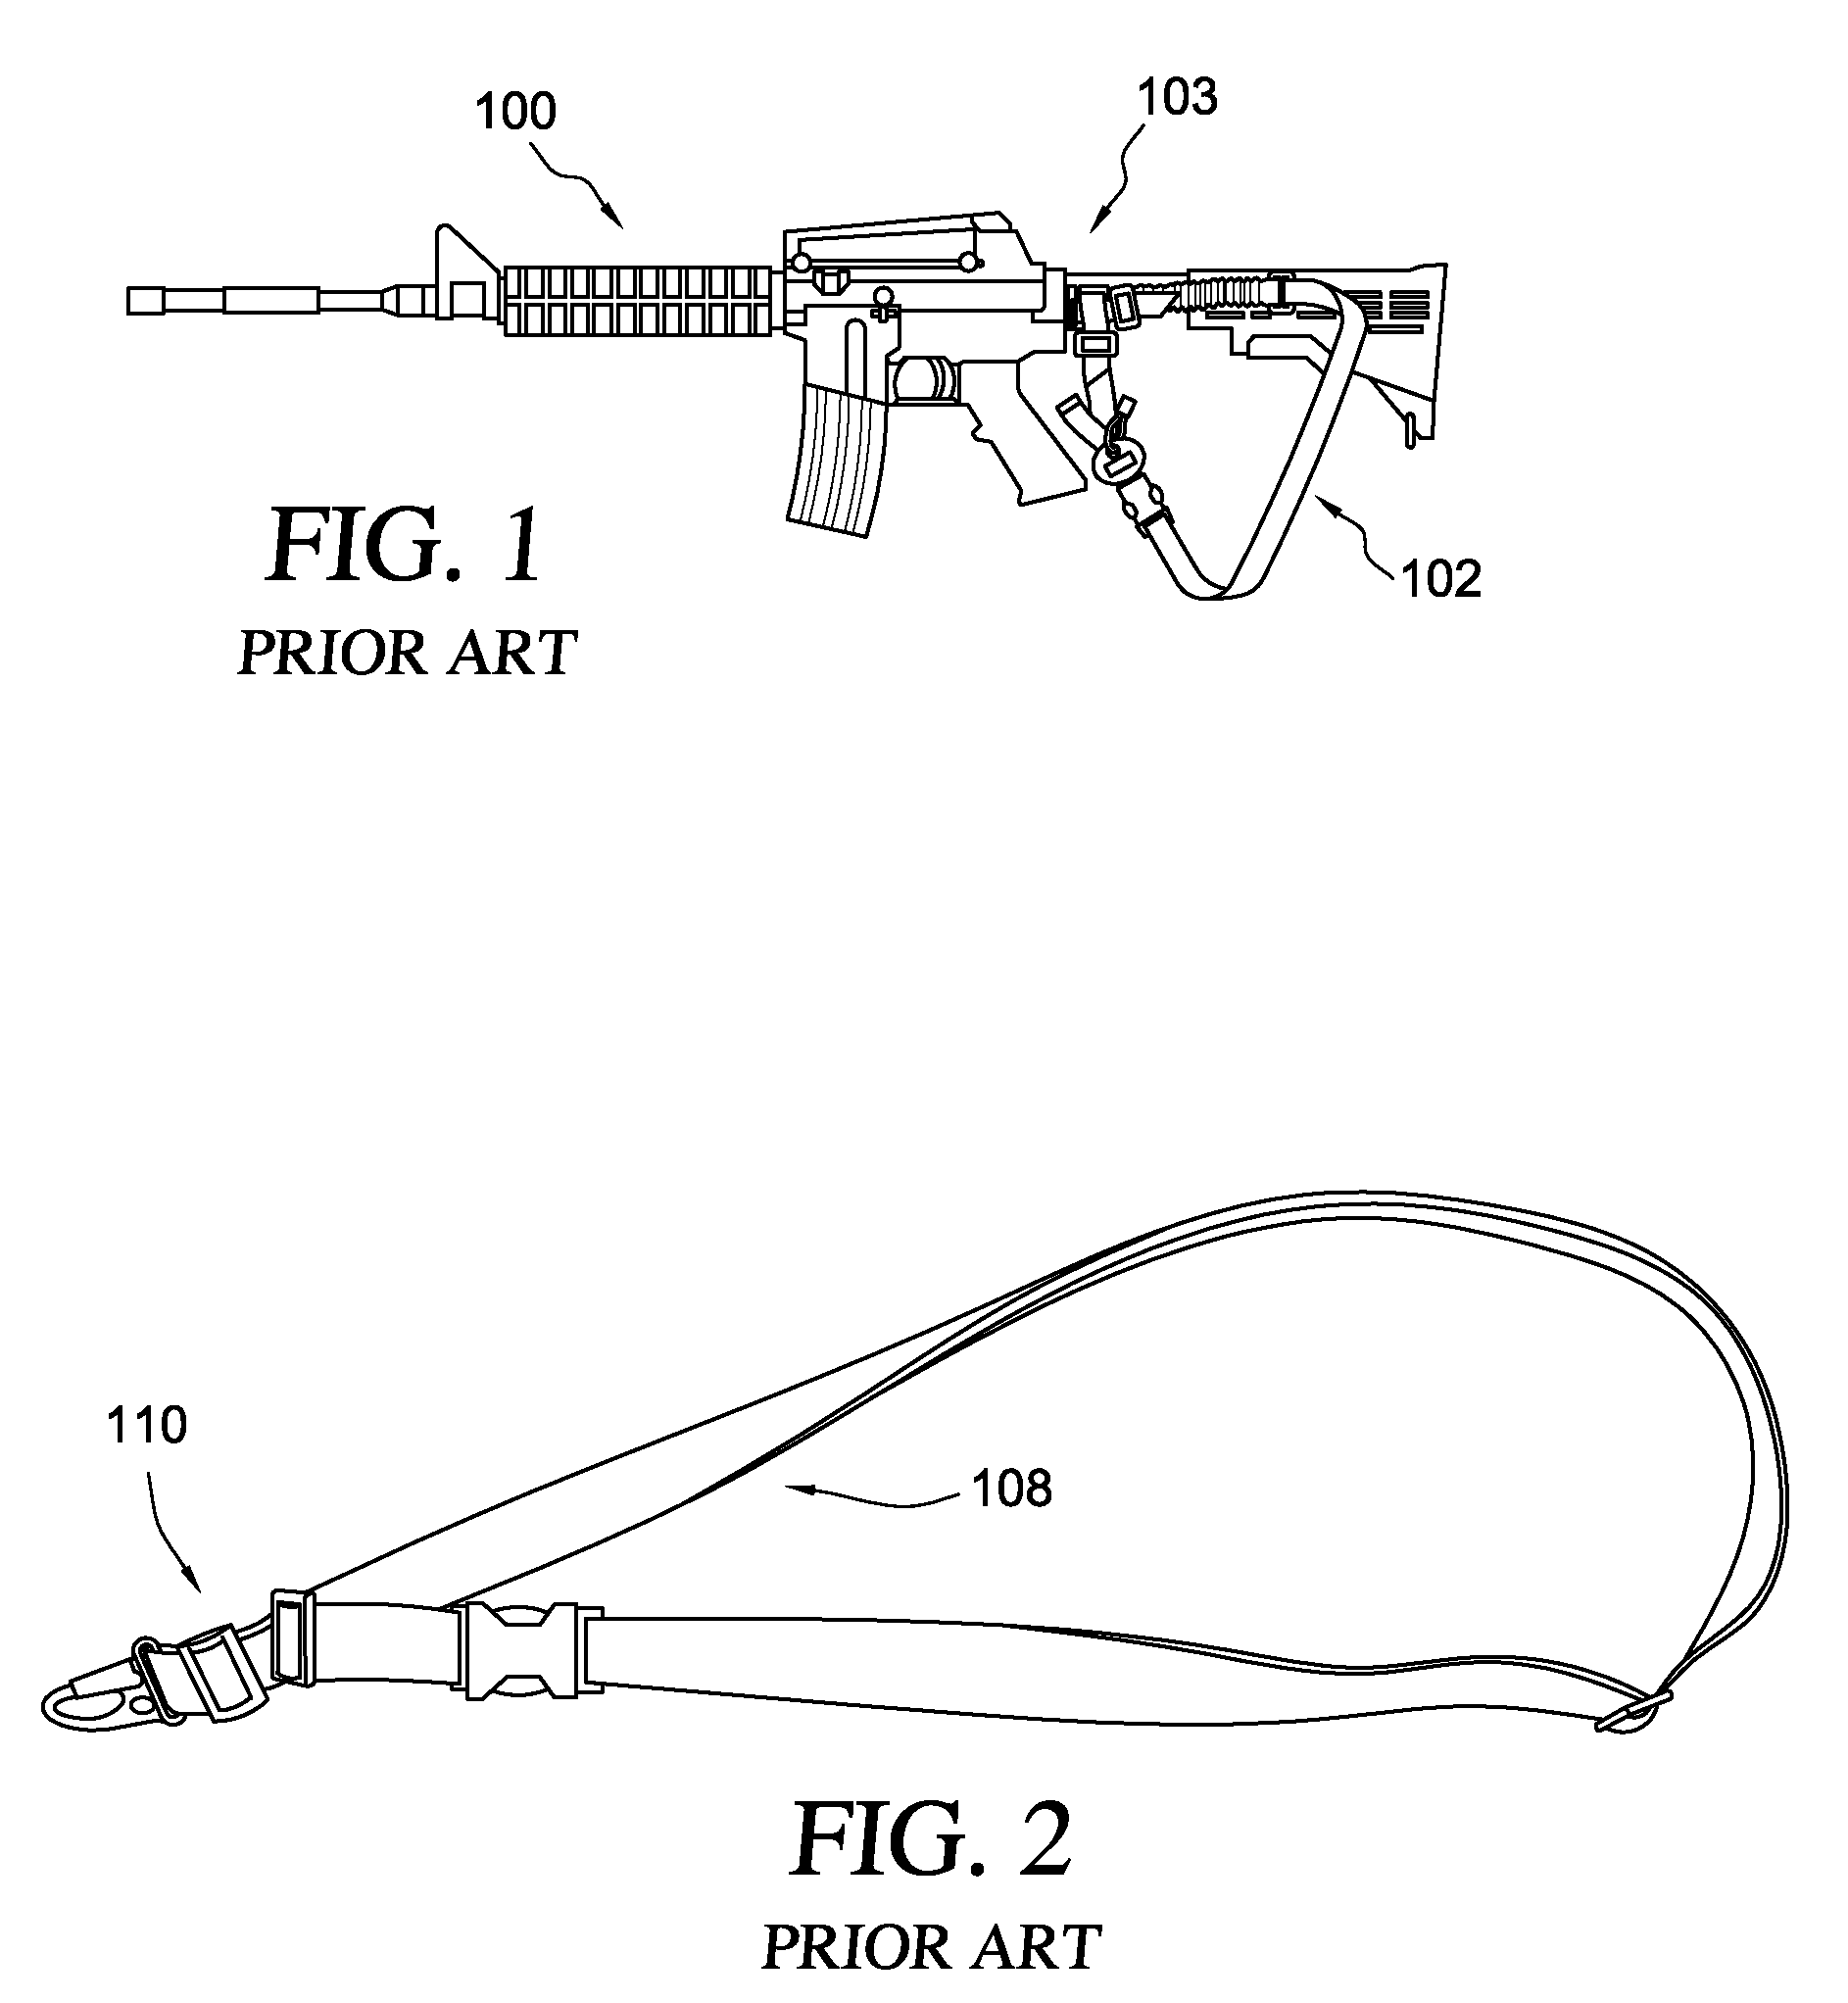 Loop-shaped Sling Adapter for use on Buffer Tube Assembly or Rifle Stock